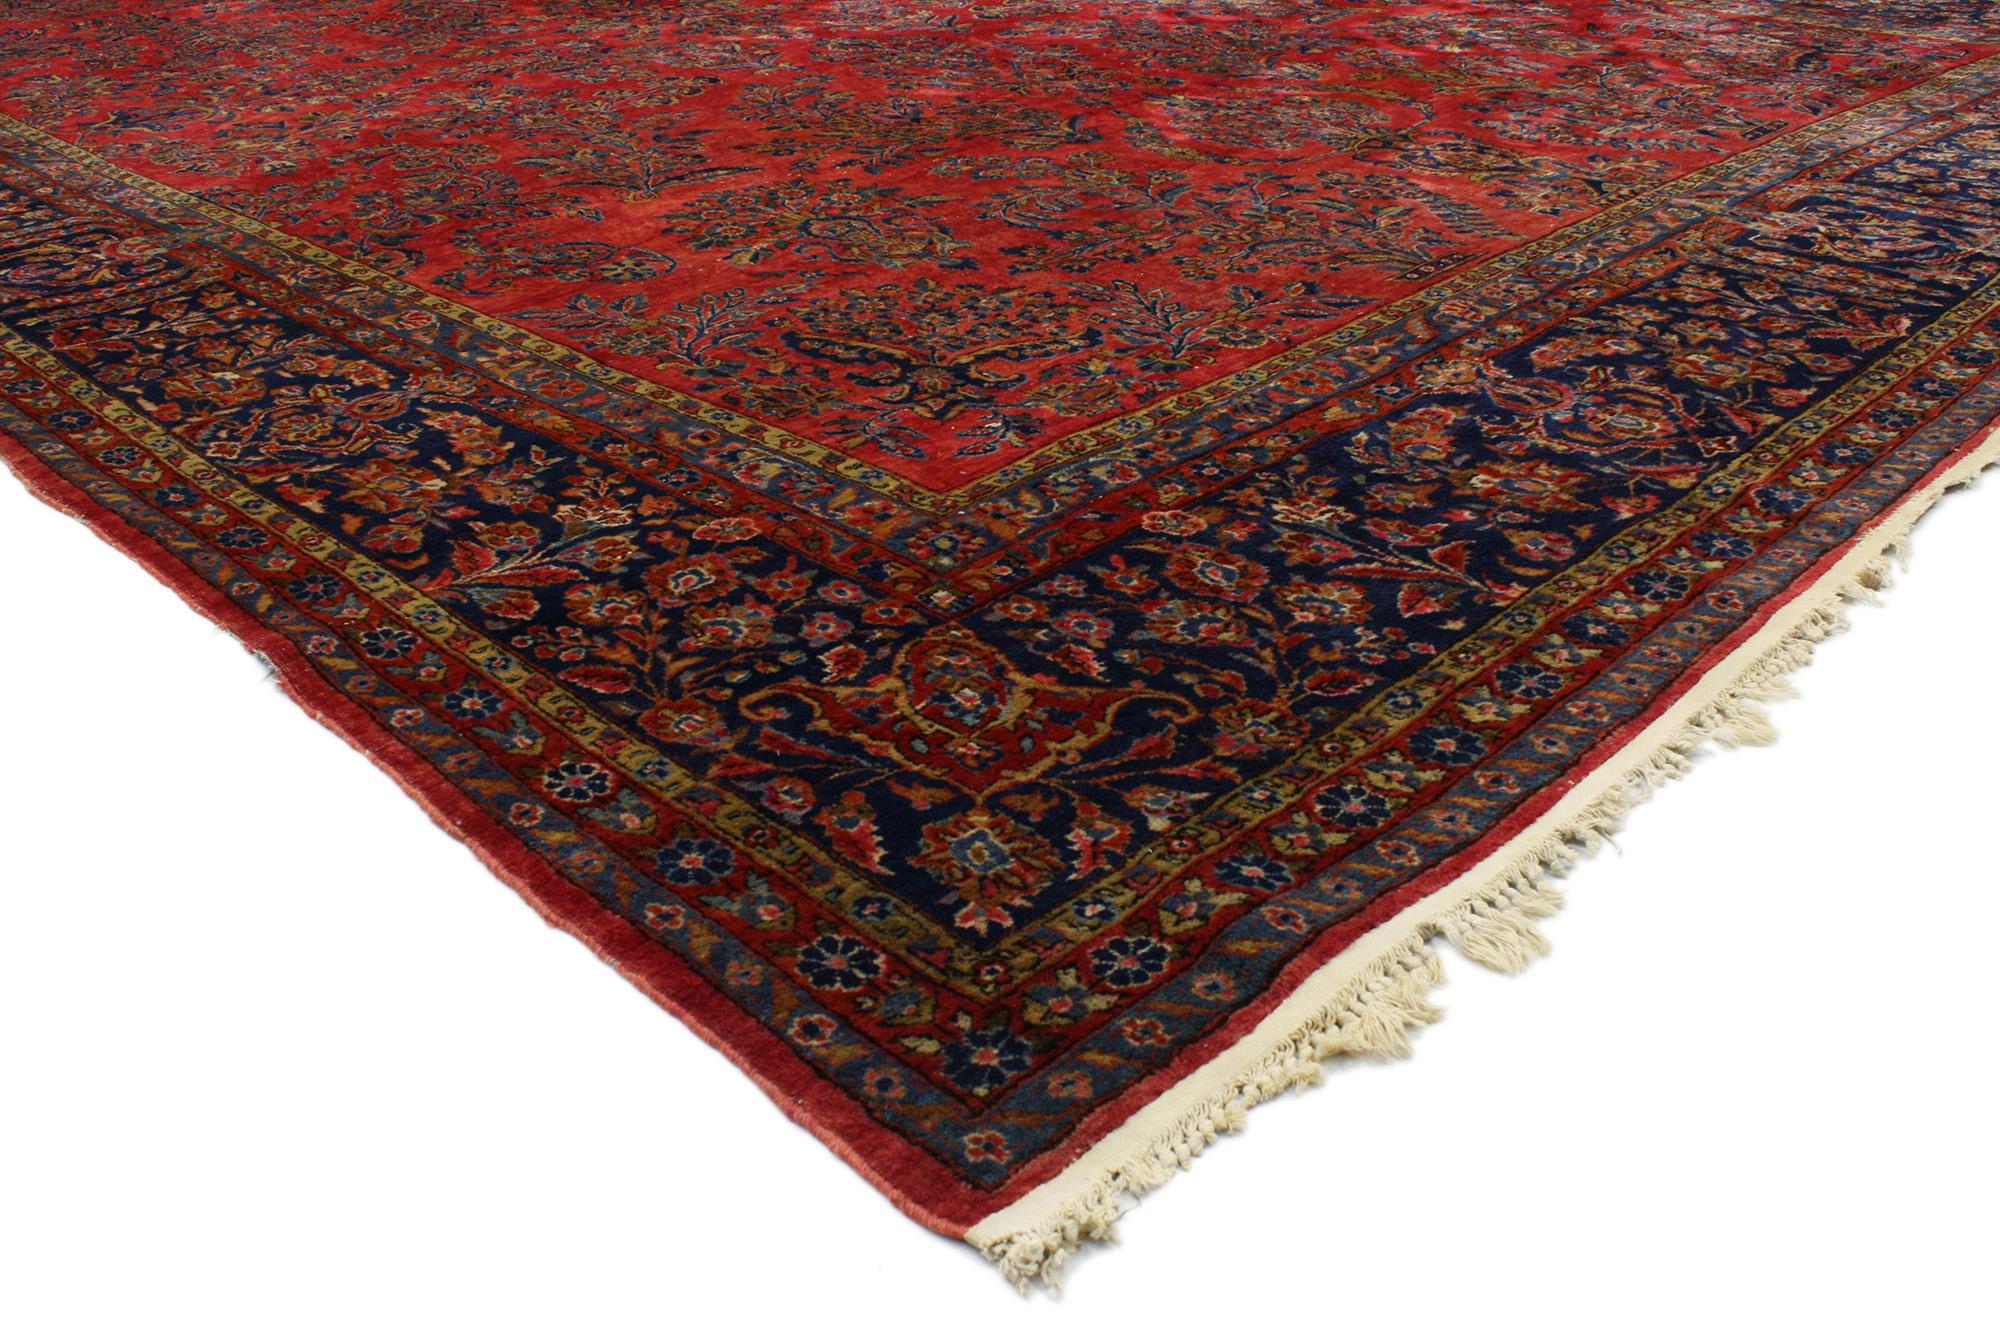 74971 Antique Persian Kashan Rug, 09'09 x 15'04. Persian Kashan rugs, originating from Kashan, Iran, are renowned for their meticulous craftsmanship, intricate designs, and rich heritage. These hand-knotted treasures typically showcase a central